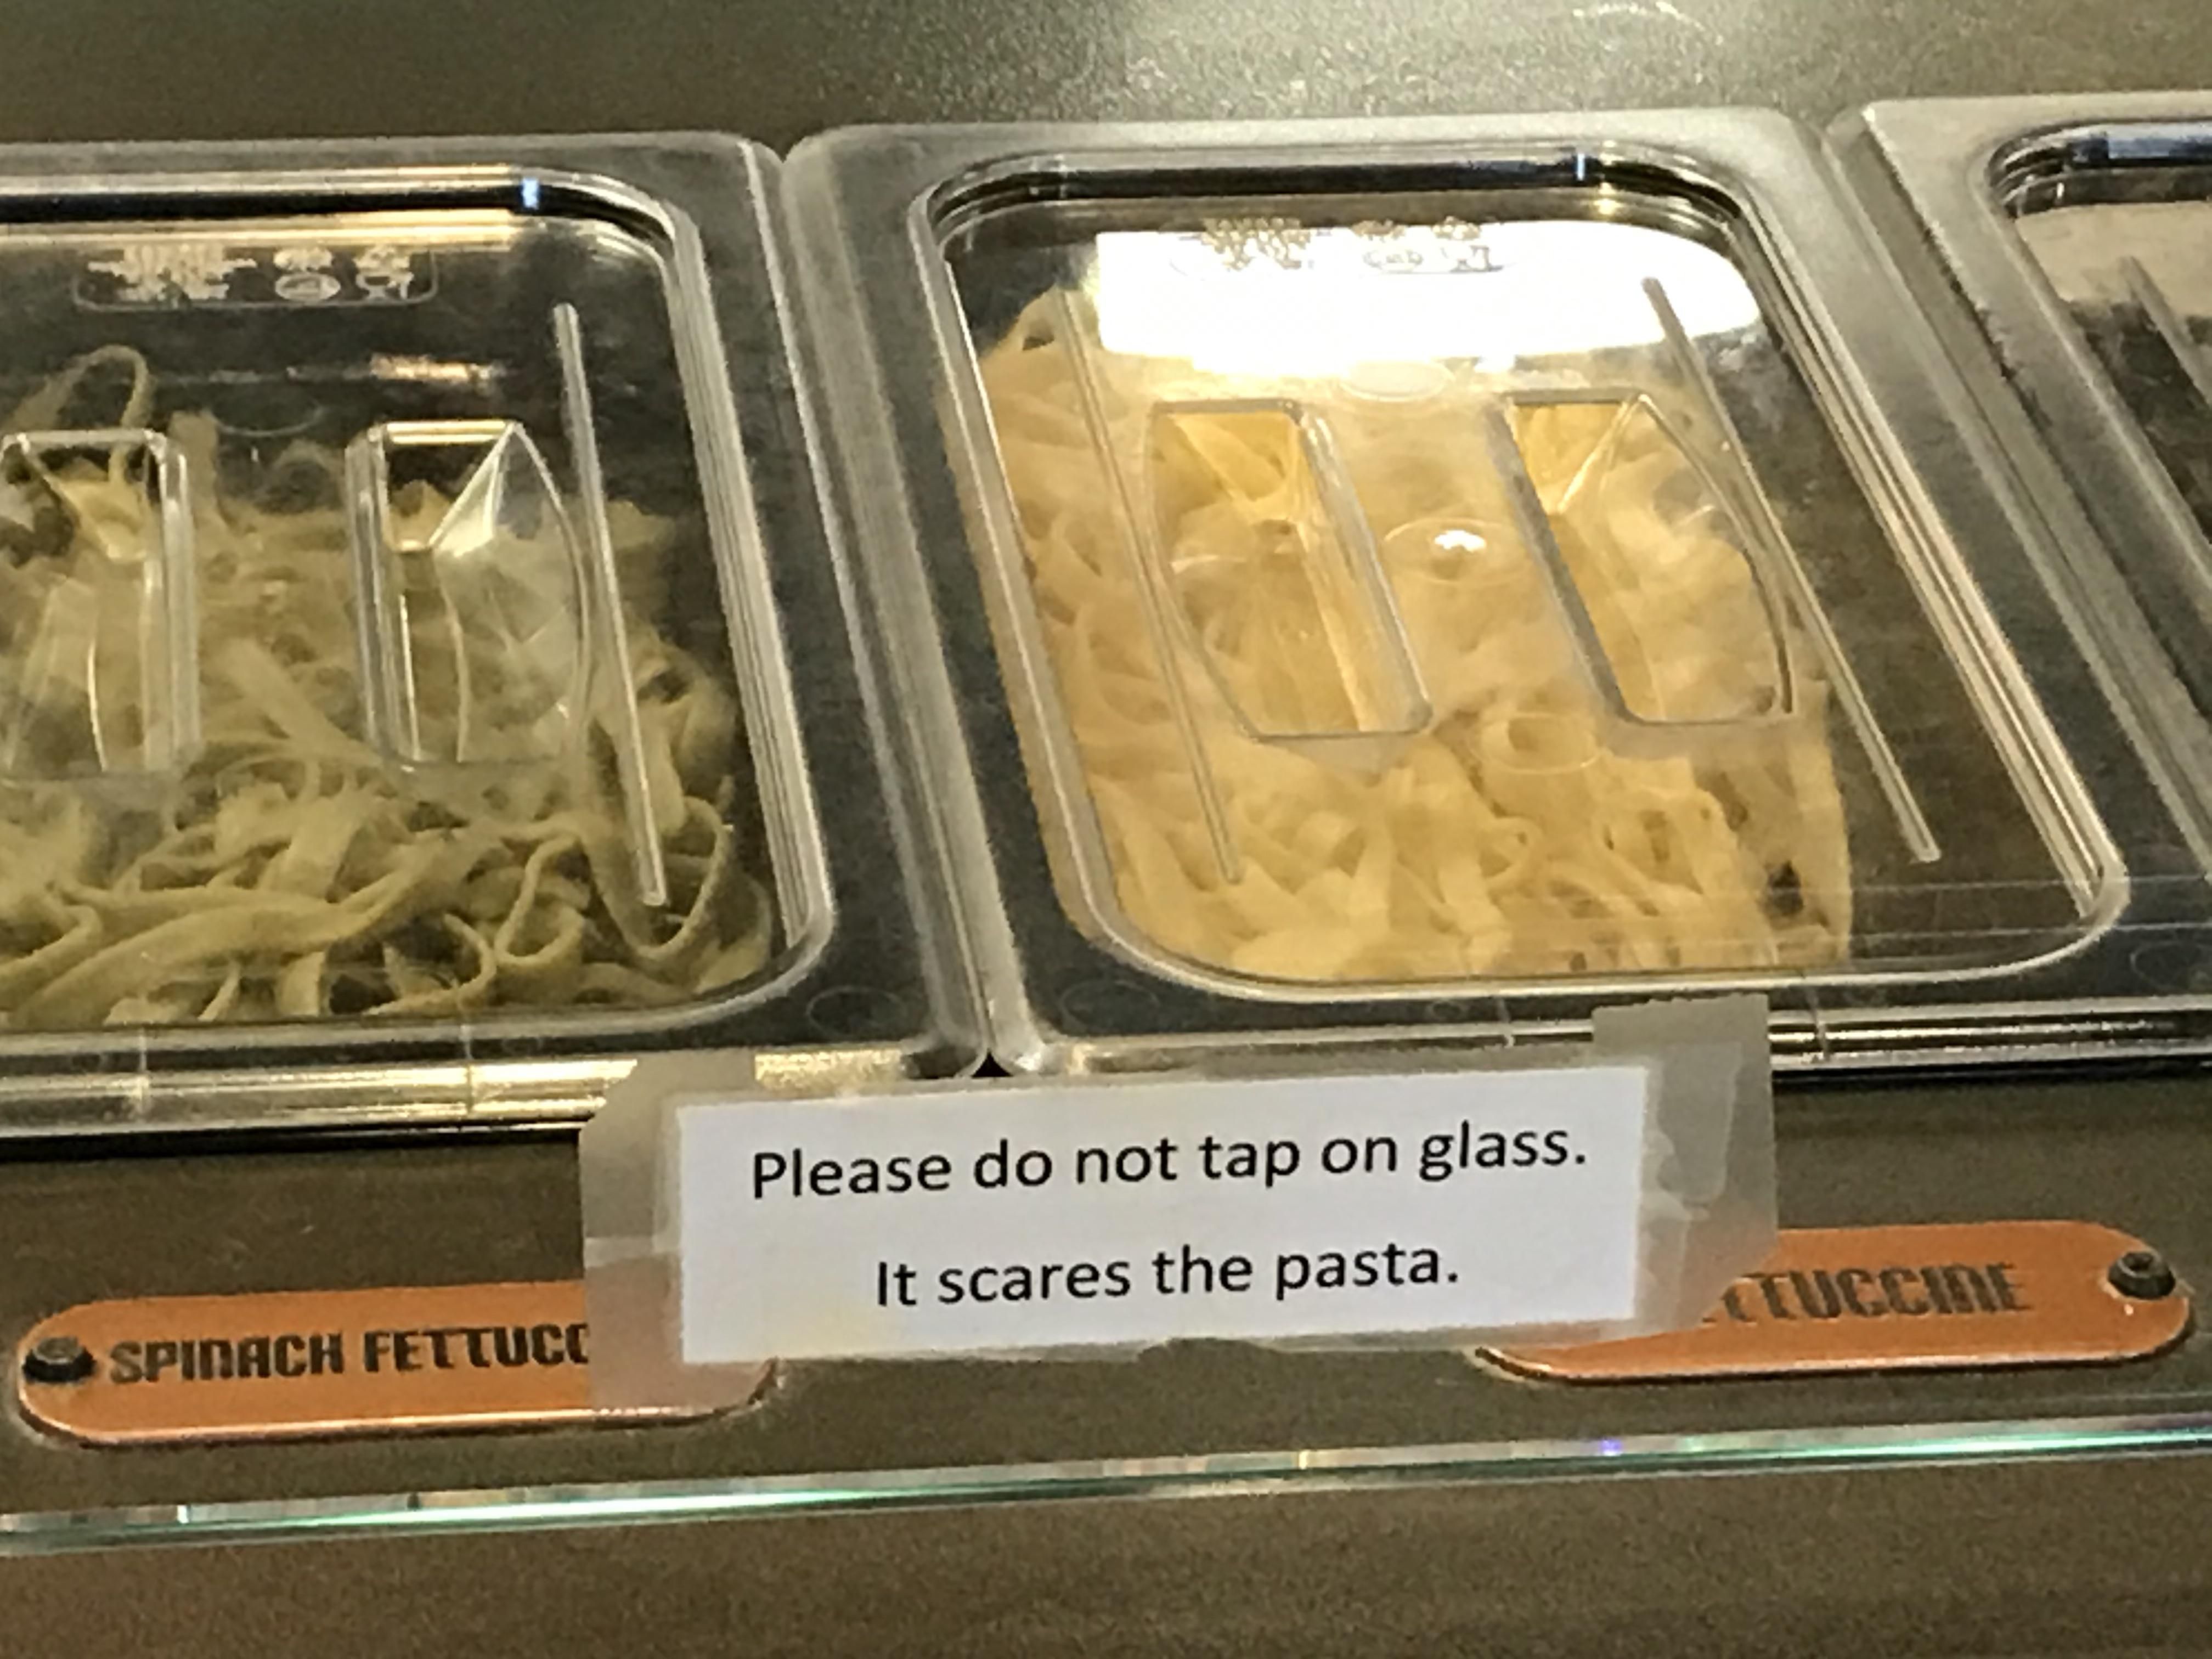 The sign at a buffet I just went to.